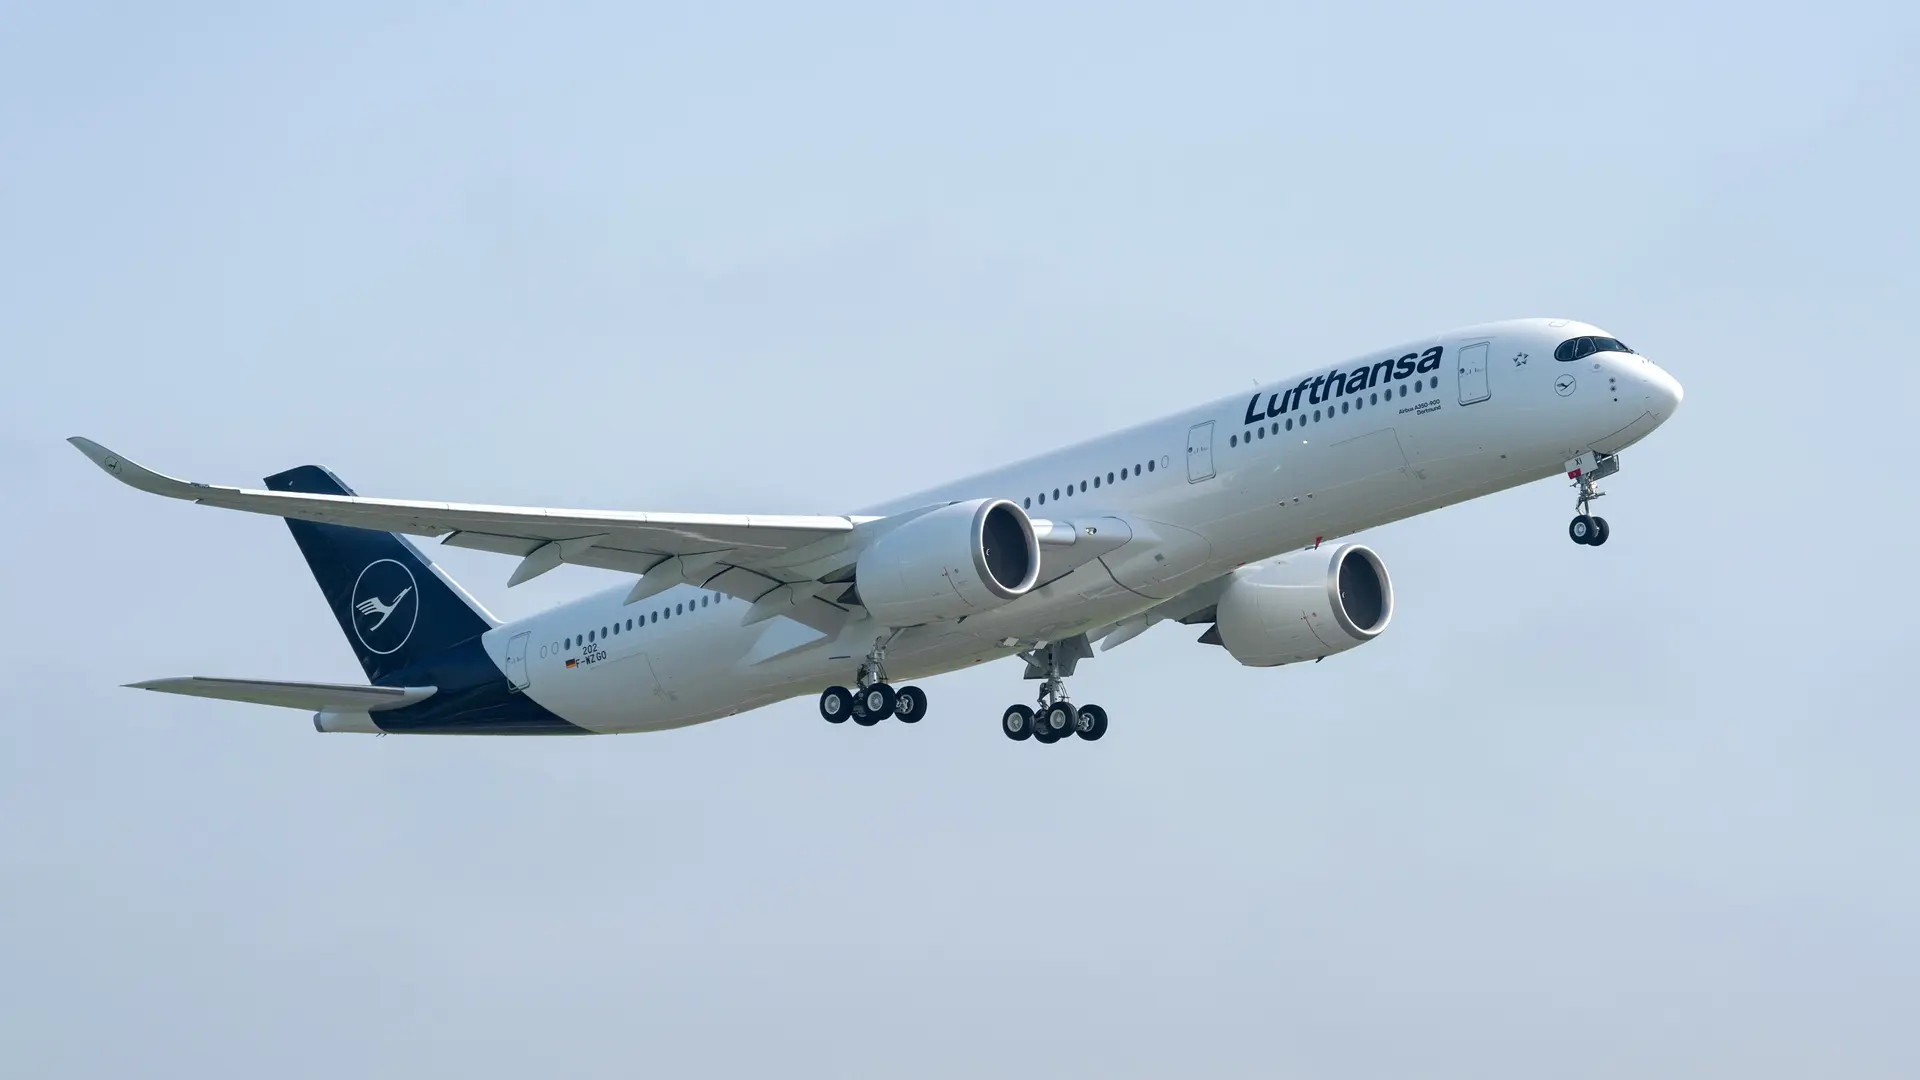 Airlines News - Lufthansa - Allegris - 1st May take-off - Munich to Vancouver 